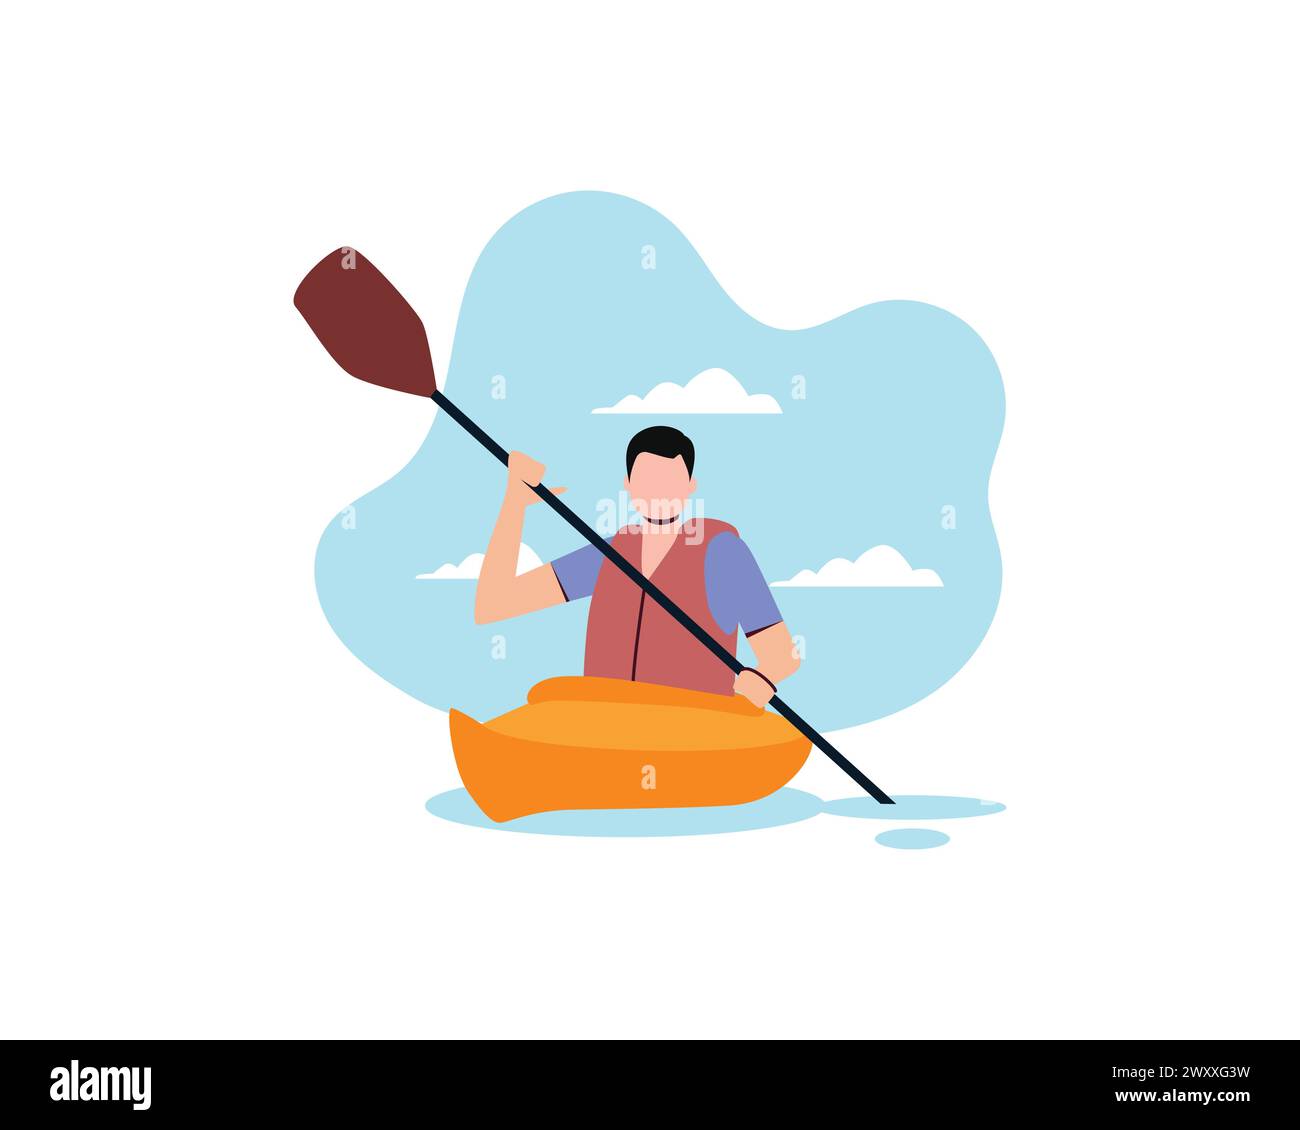 Young man solo rowing boat with paddle. Active people with extreme sport and leisure activity vector illustration design isolated on white background. Stock Vector